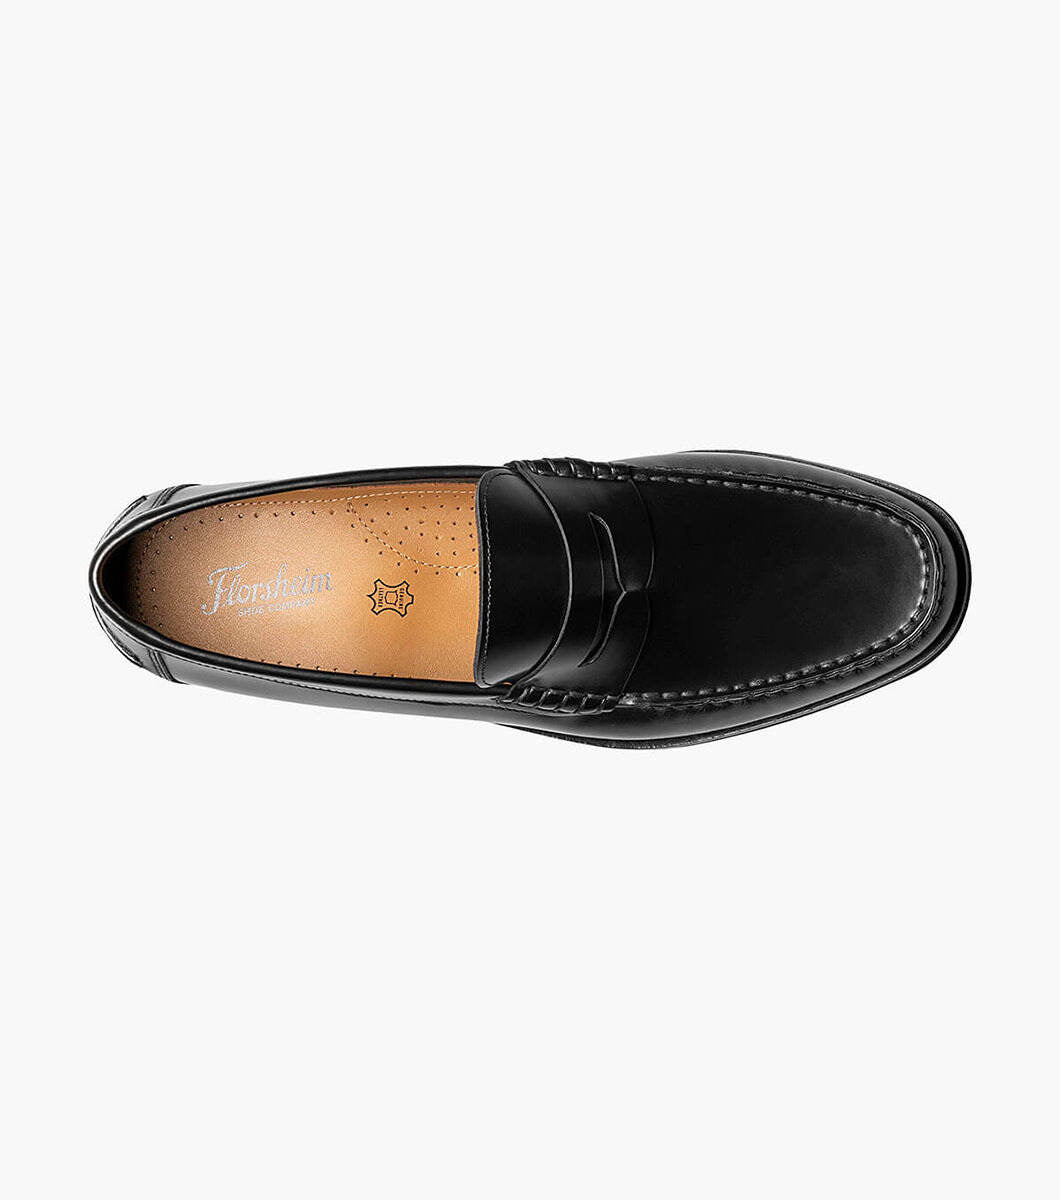 The Florsheim Berkley Flex Penny Loafer features a soft genuine handsewn leather upper with a stylish beef roll and stacked heel. Whether you dress them up with a sport coat or dress them down with a pair of jeans, the Berkley Flex elevates anything you wear. 